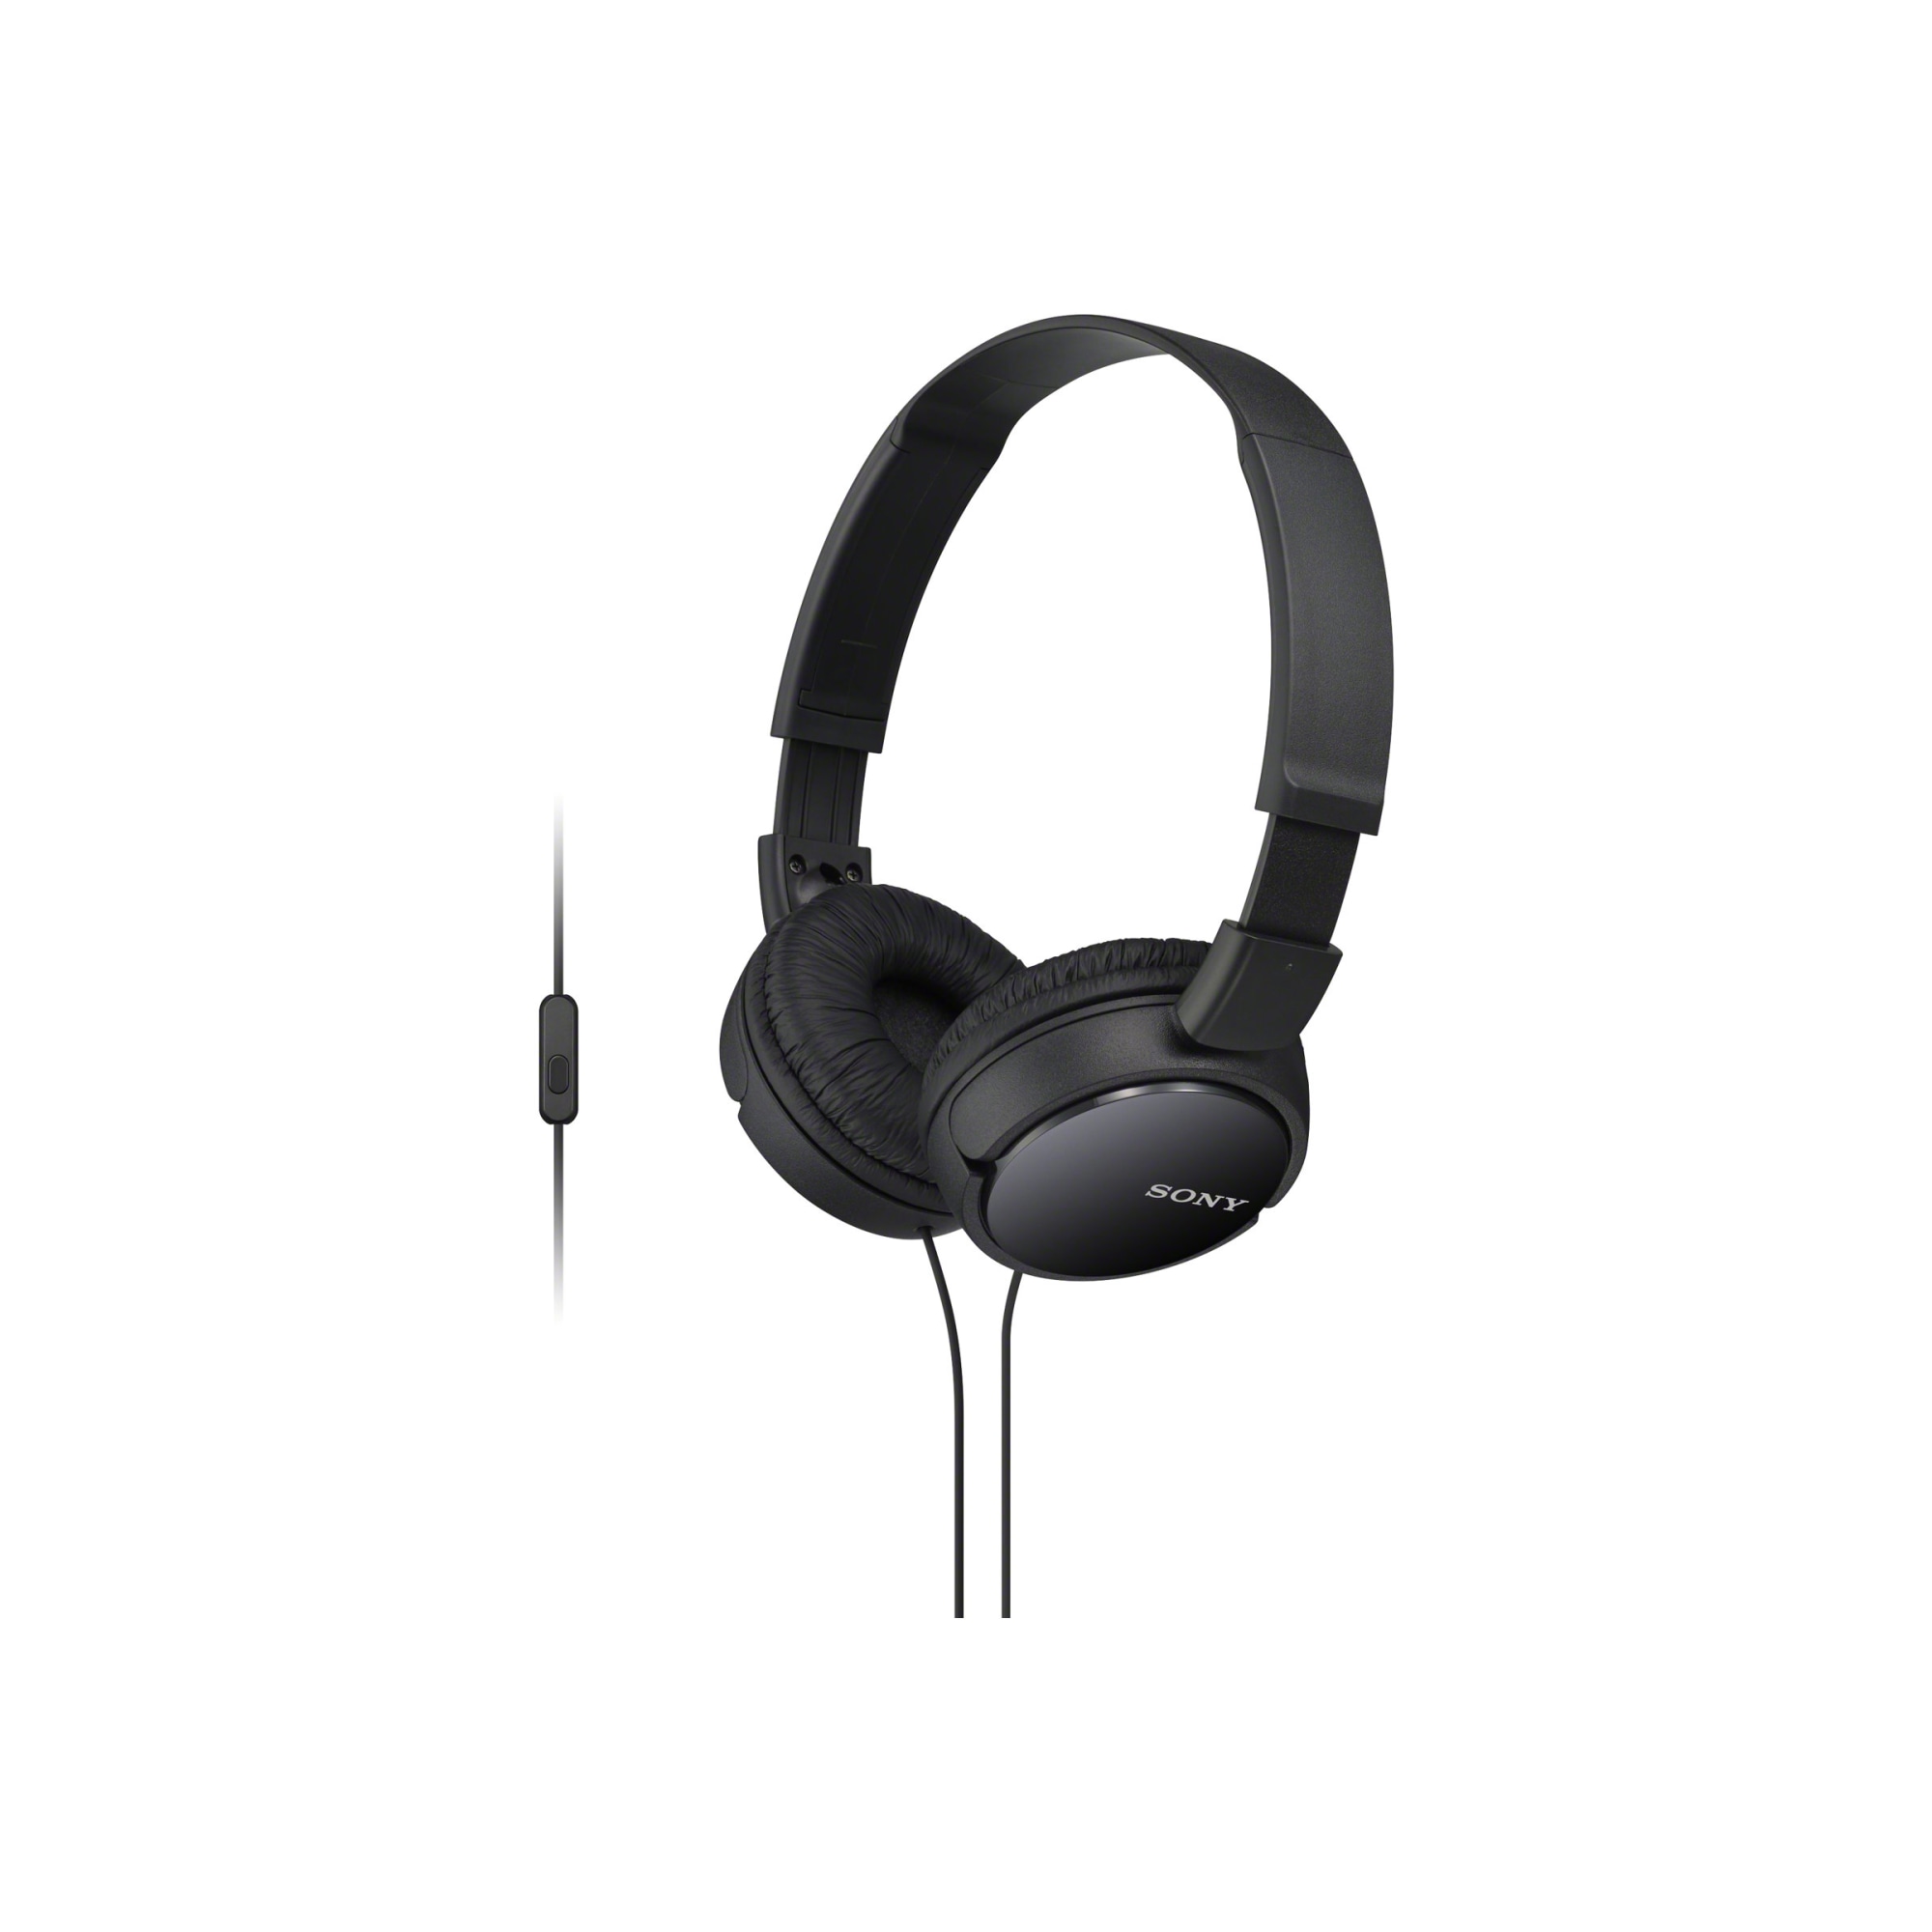 Sony MDR-ZX110AP EXTRA BASS Headphones with Mic- Black - image 2 of 3